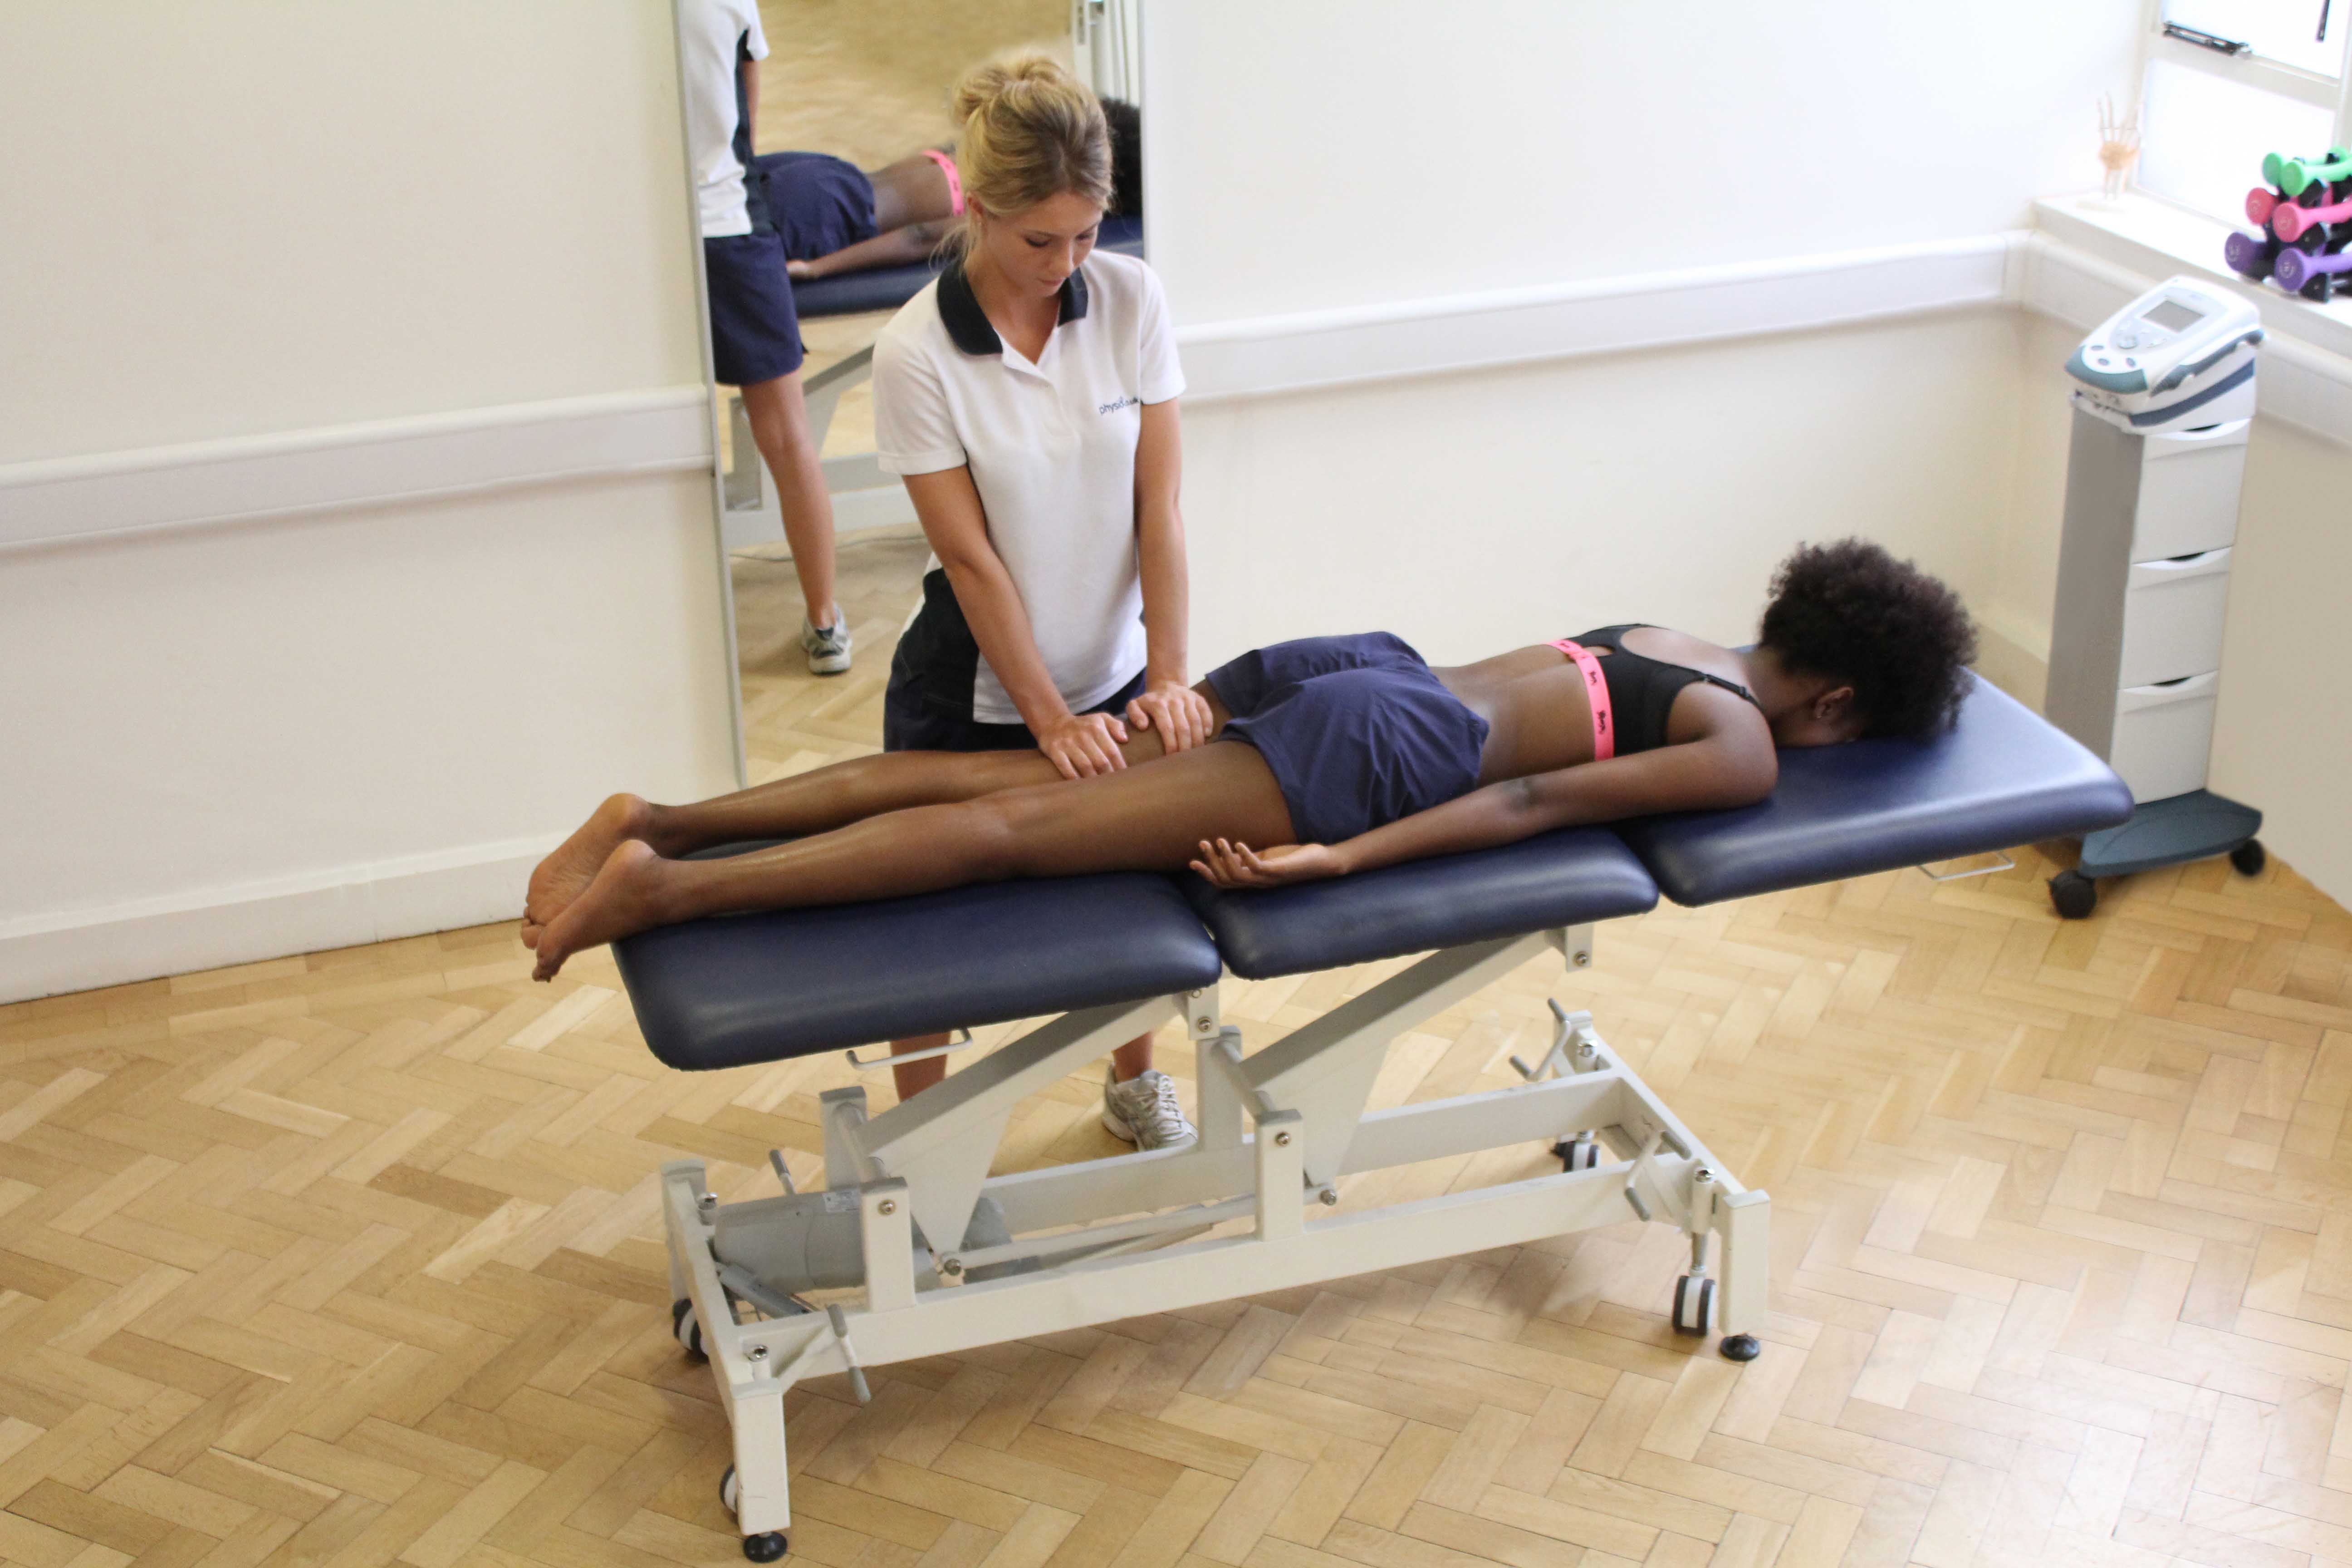 Compression massage applied to the hamstring muscles by experienced therapist